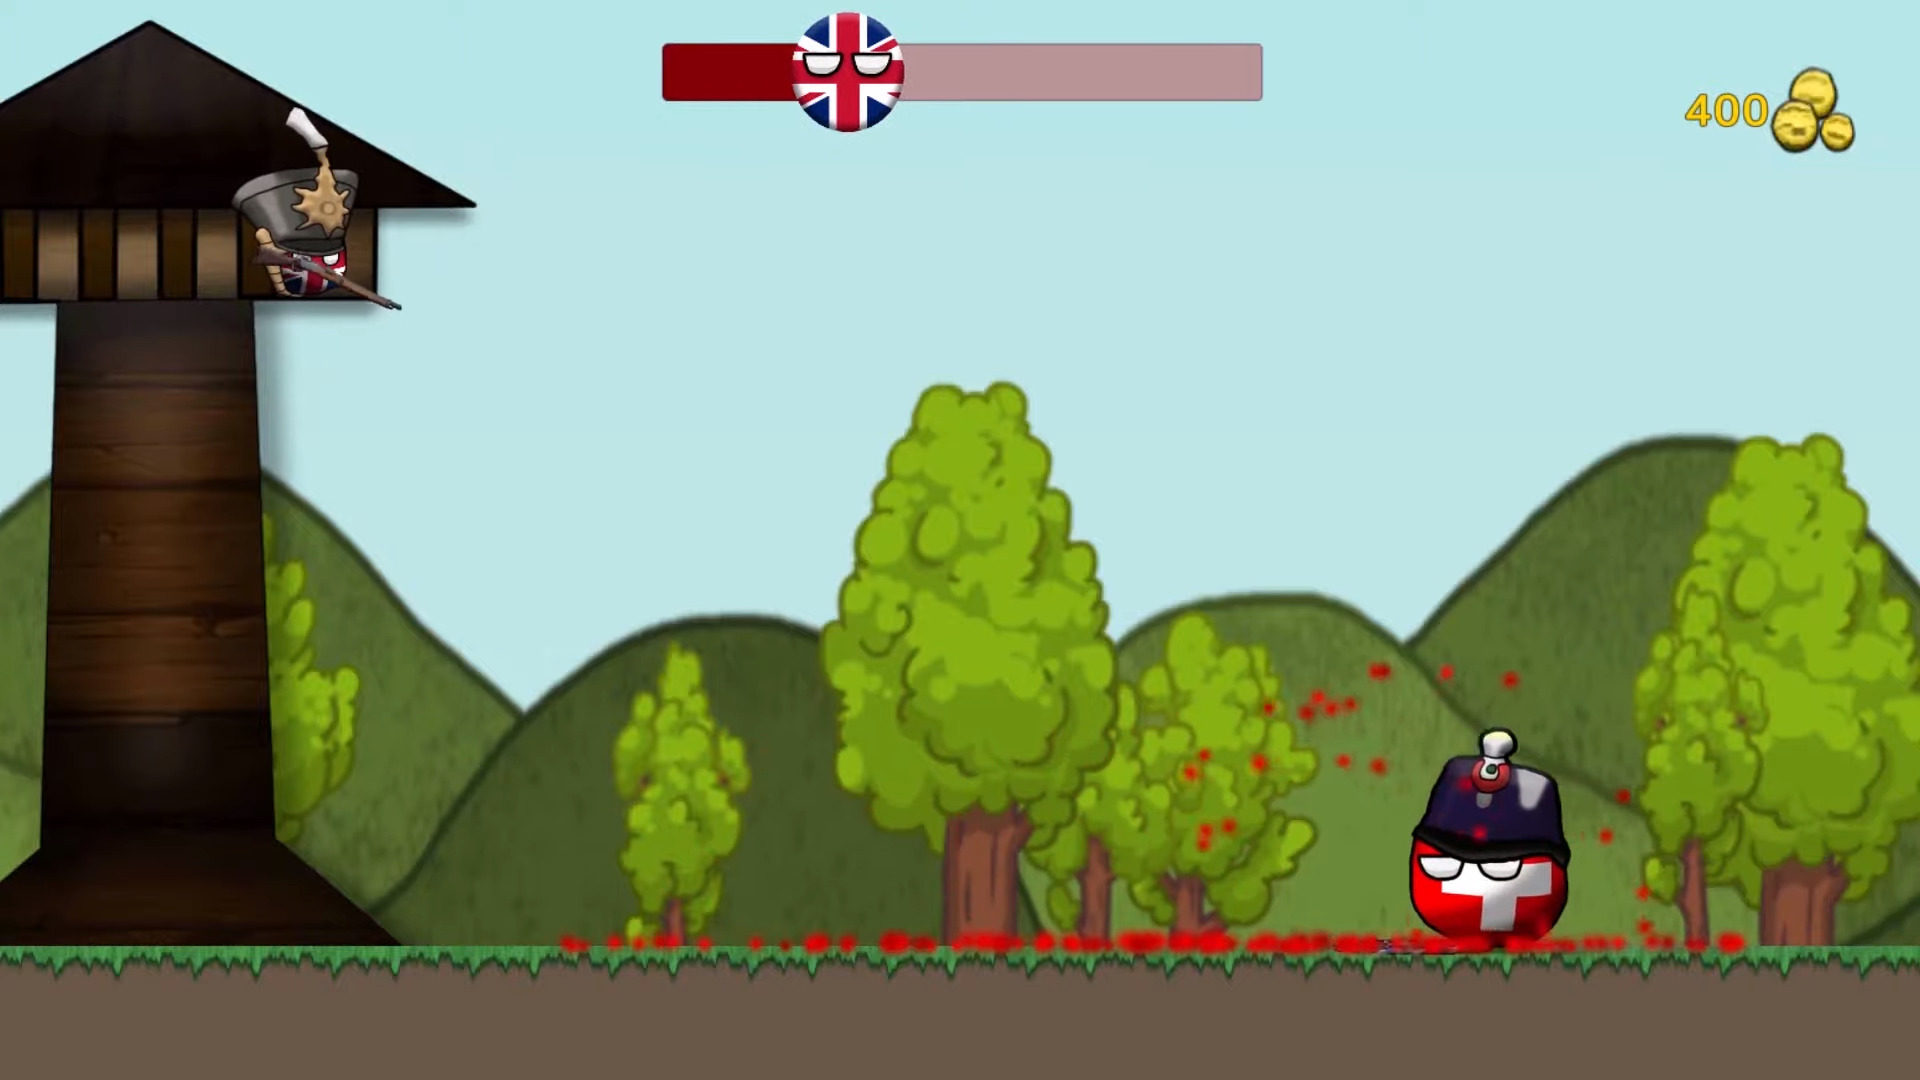 Countryball: Europe 1890 - Android game screenshots.